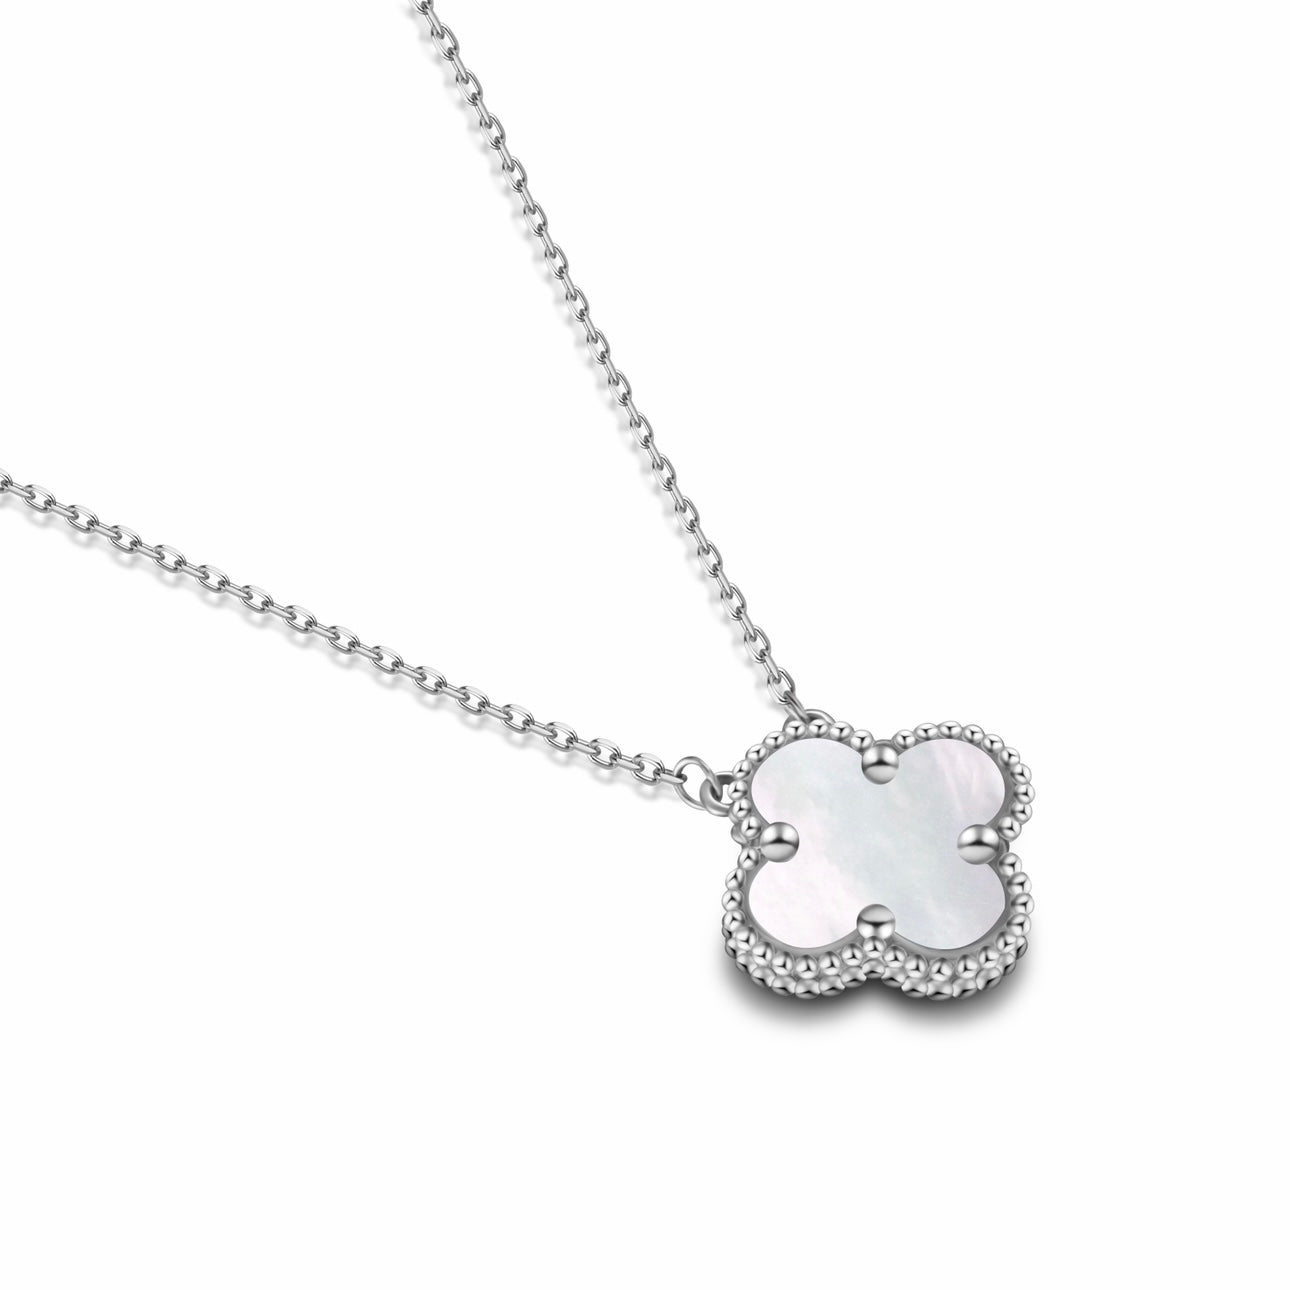 Clover Necklace - in Black/White Shell CZ 5A 925 Sterling Silver 18K Gold Plated (Gold/Silver)